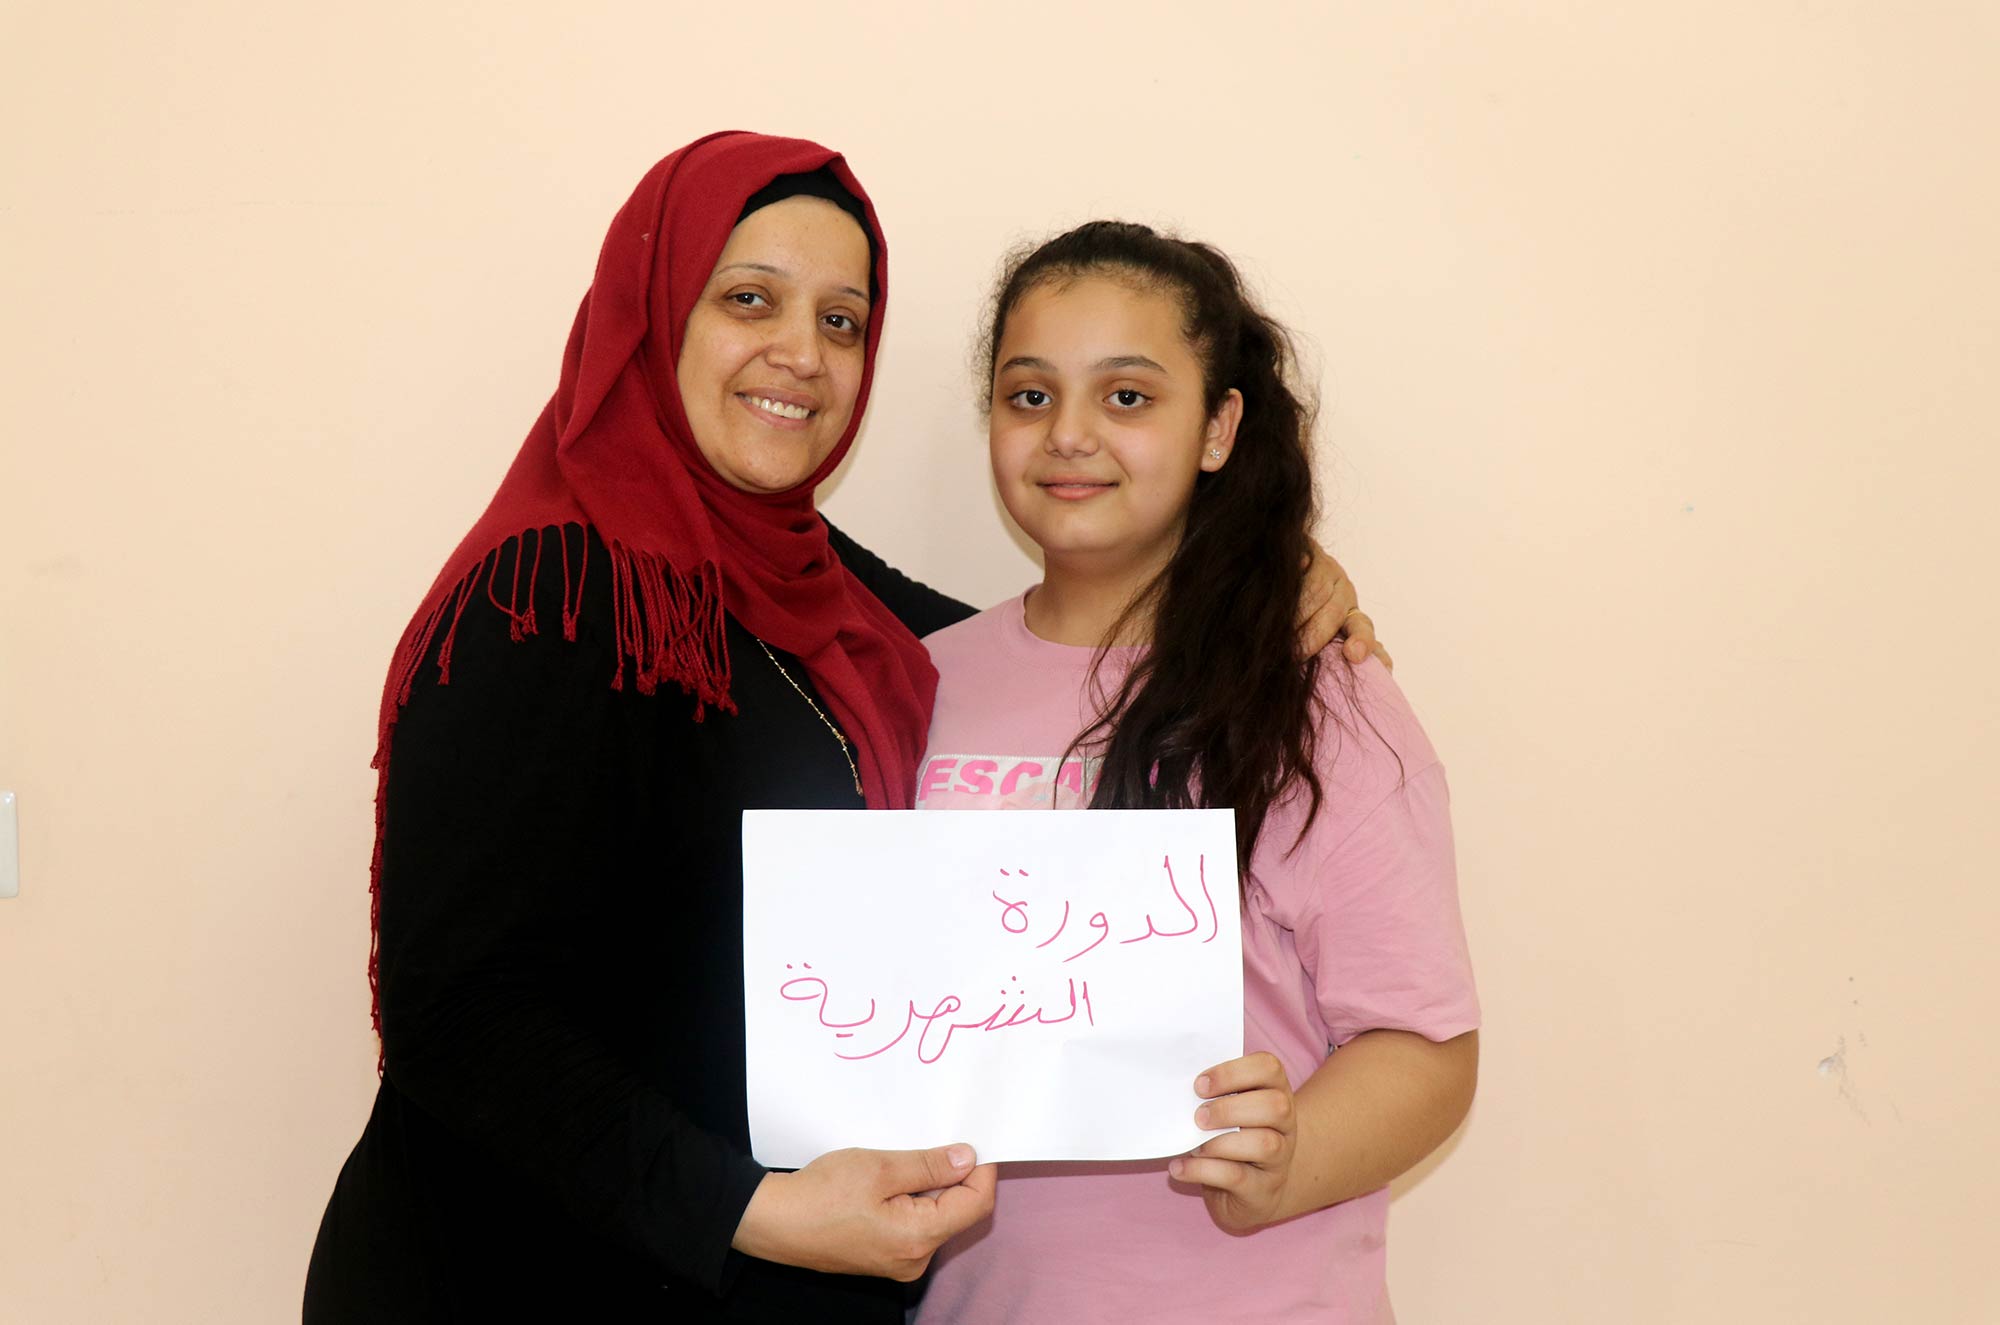 Souad and daughter Najah hold a sign on menstruation